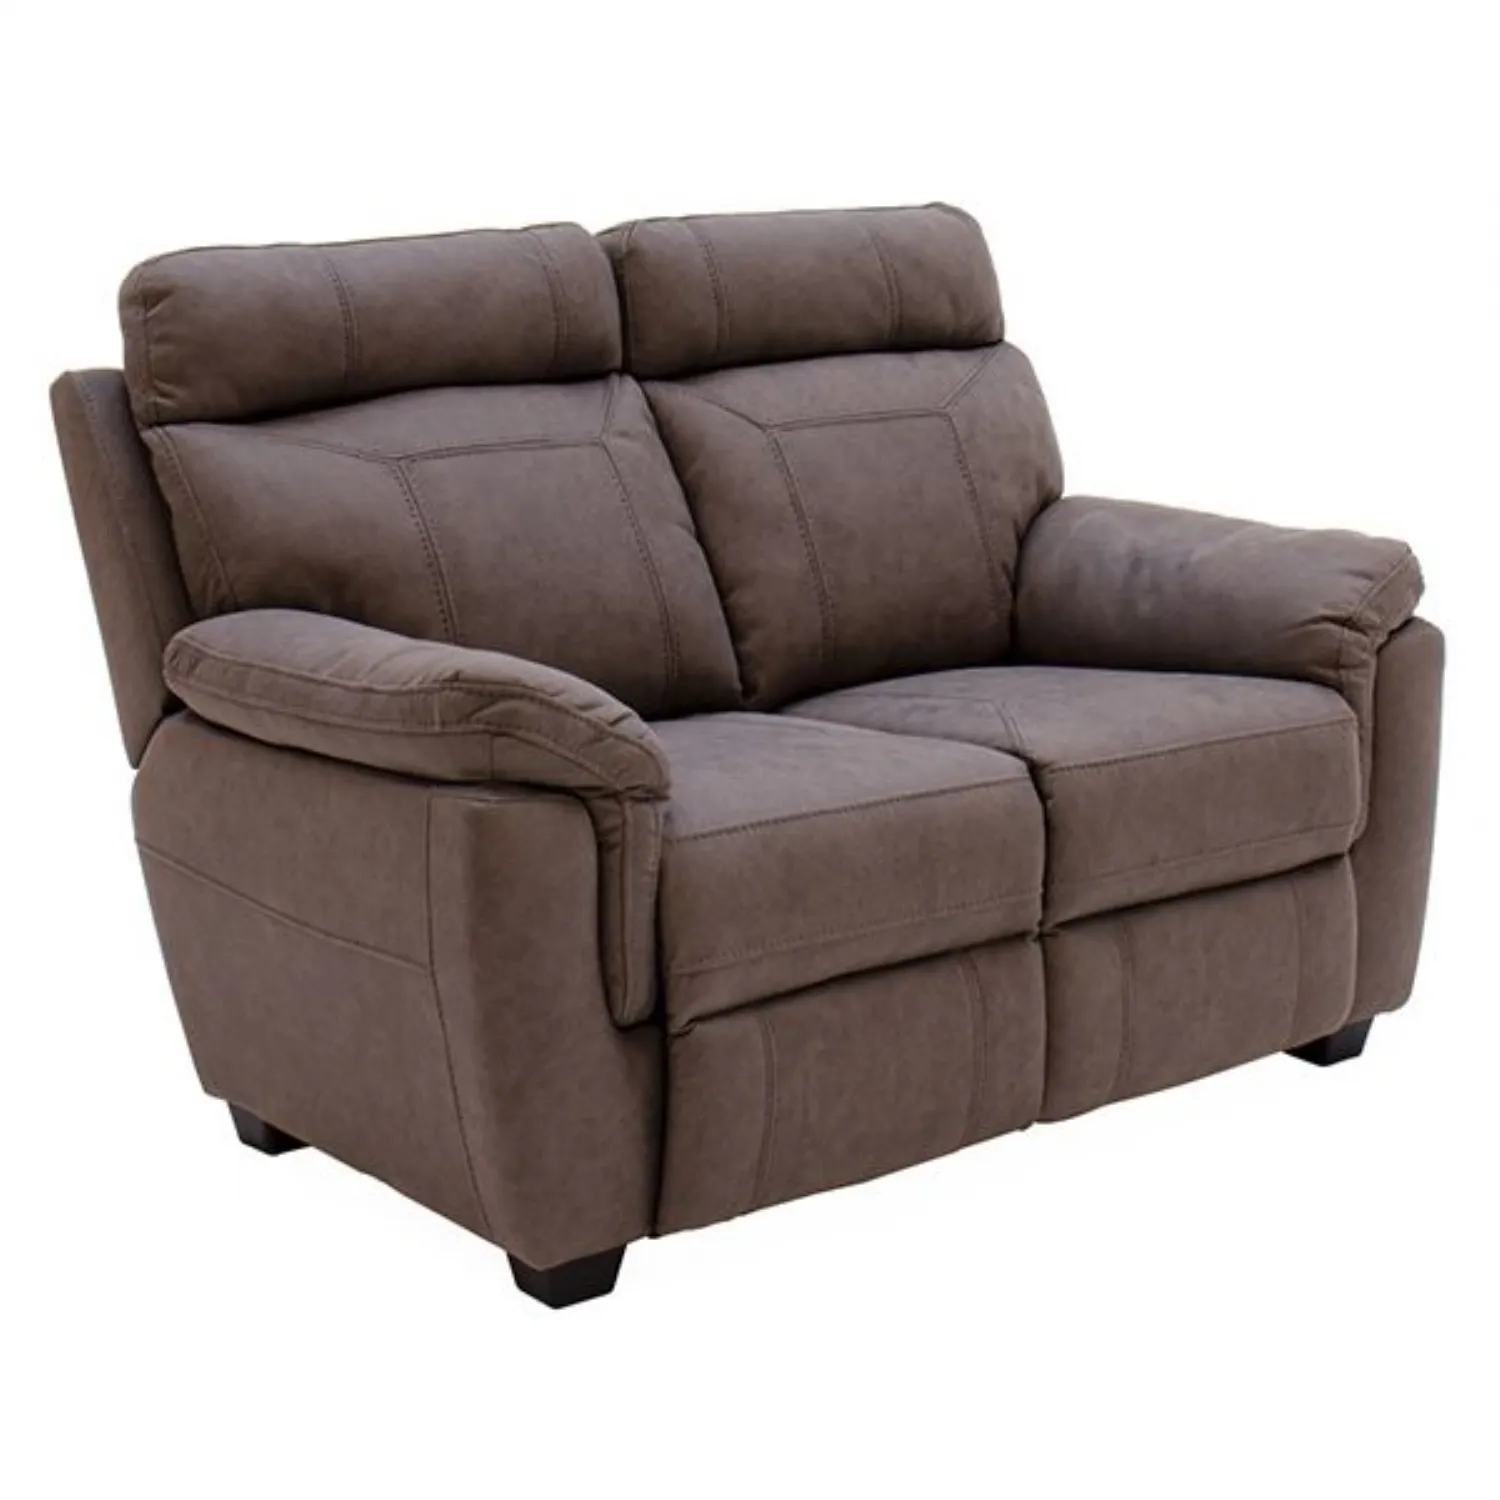 Brown Fabric 2 Seater Sofa with Contrast Stitching